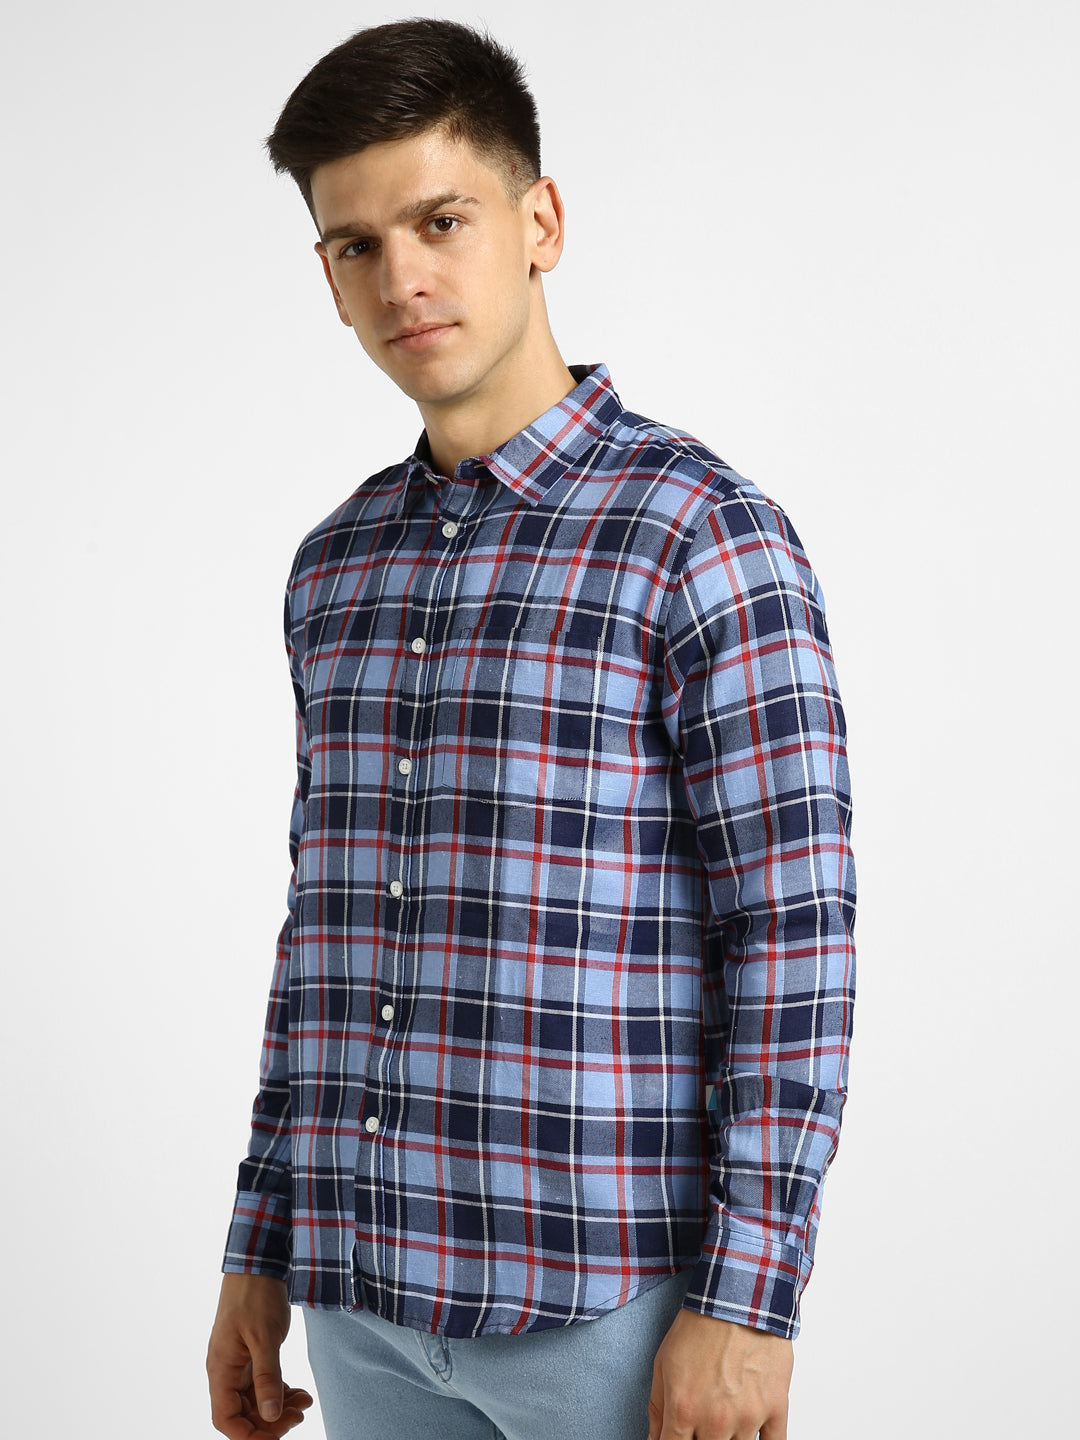 Men's Blue Cotton Full Sleeve Slim Fit Casual Checkered Shirt